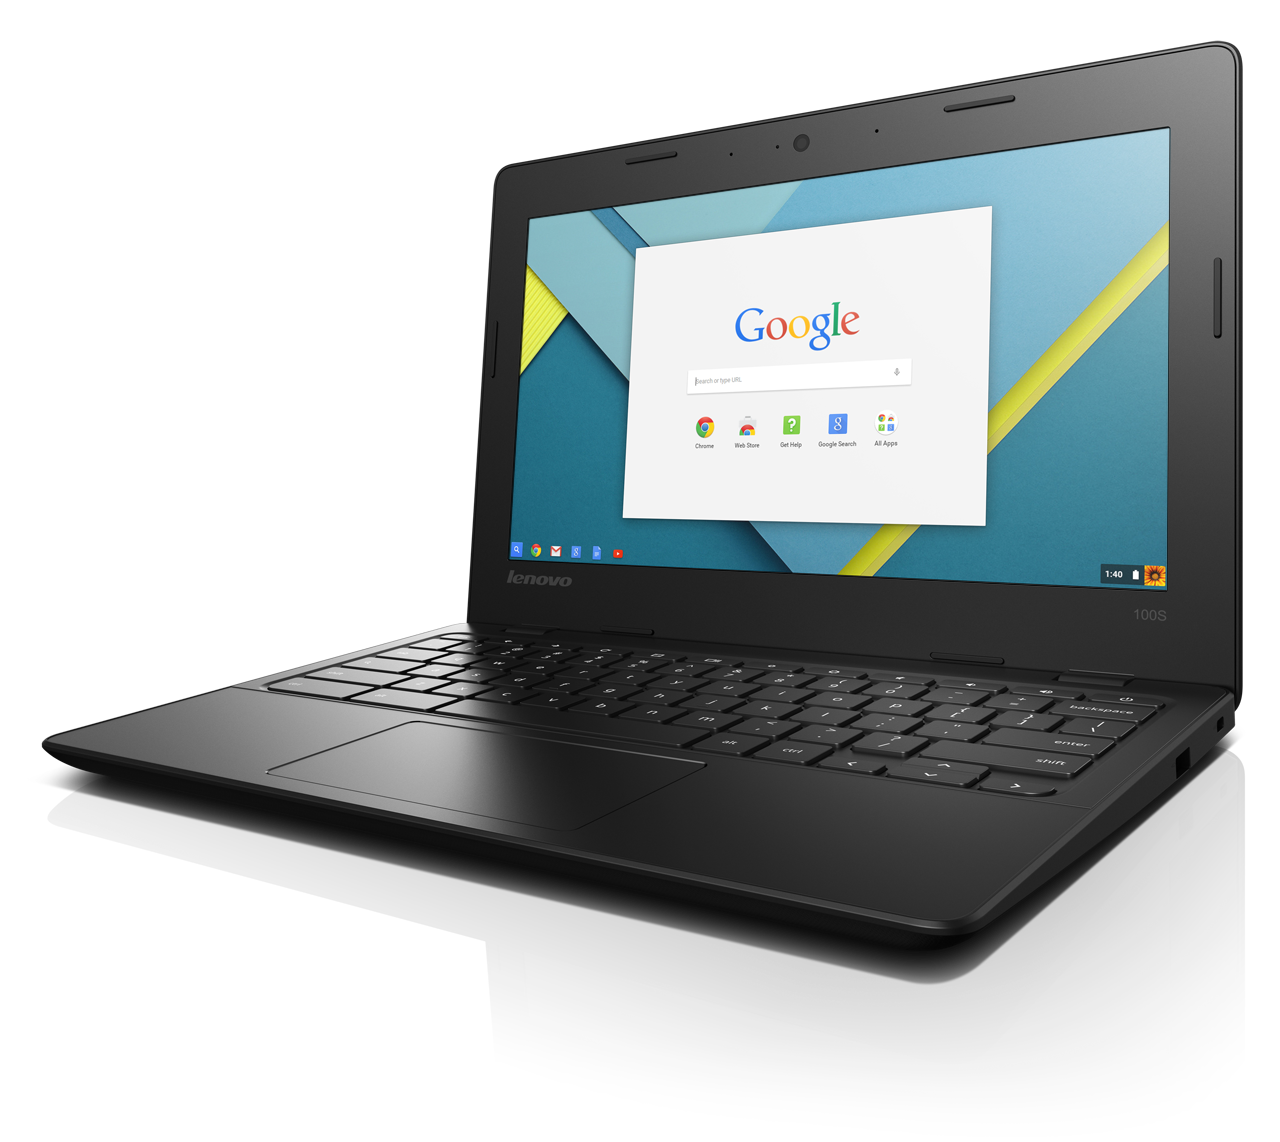 Cheap and convertible Chromebooks debut at IFA: Lenovo’s 100S, Acer’s R 11 | PCWorld